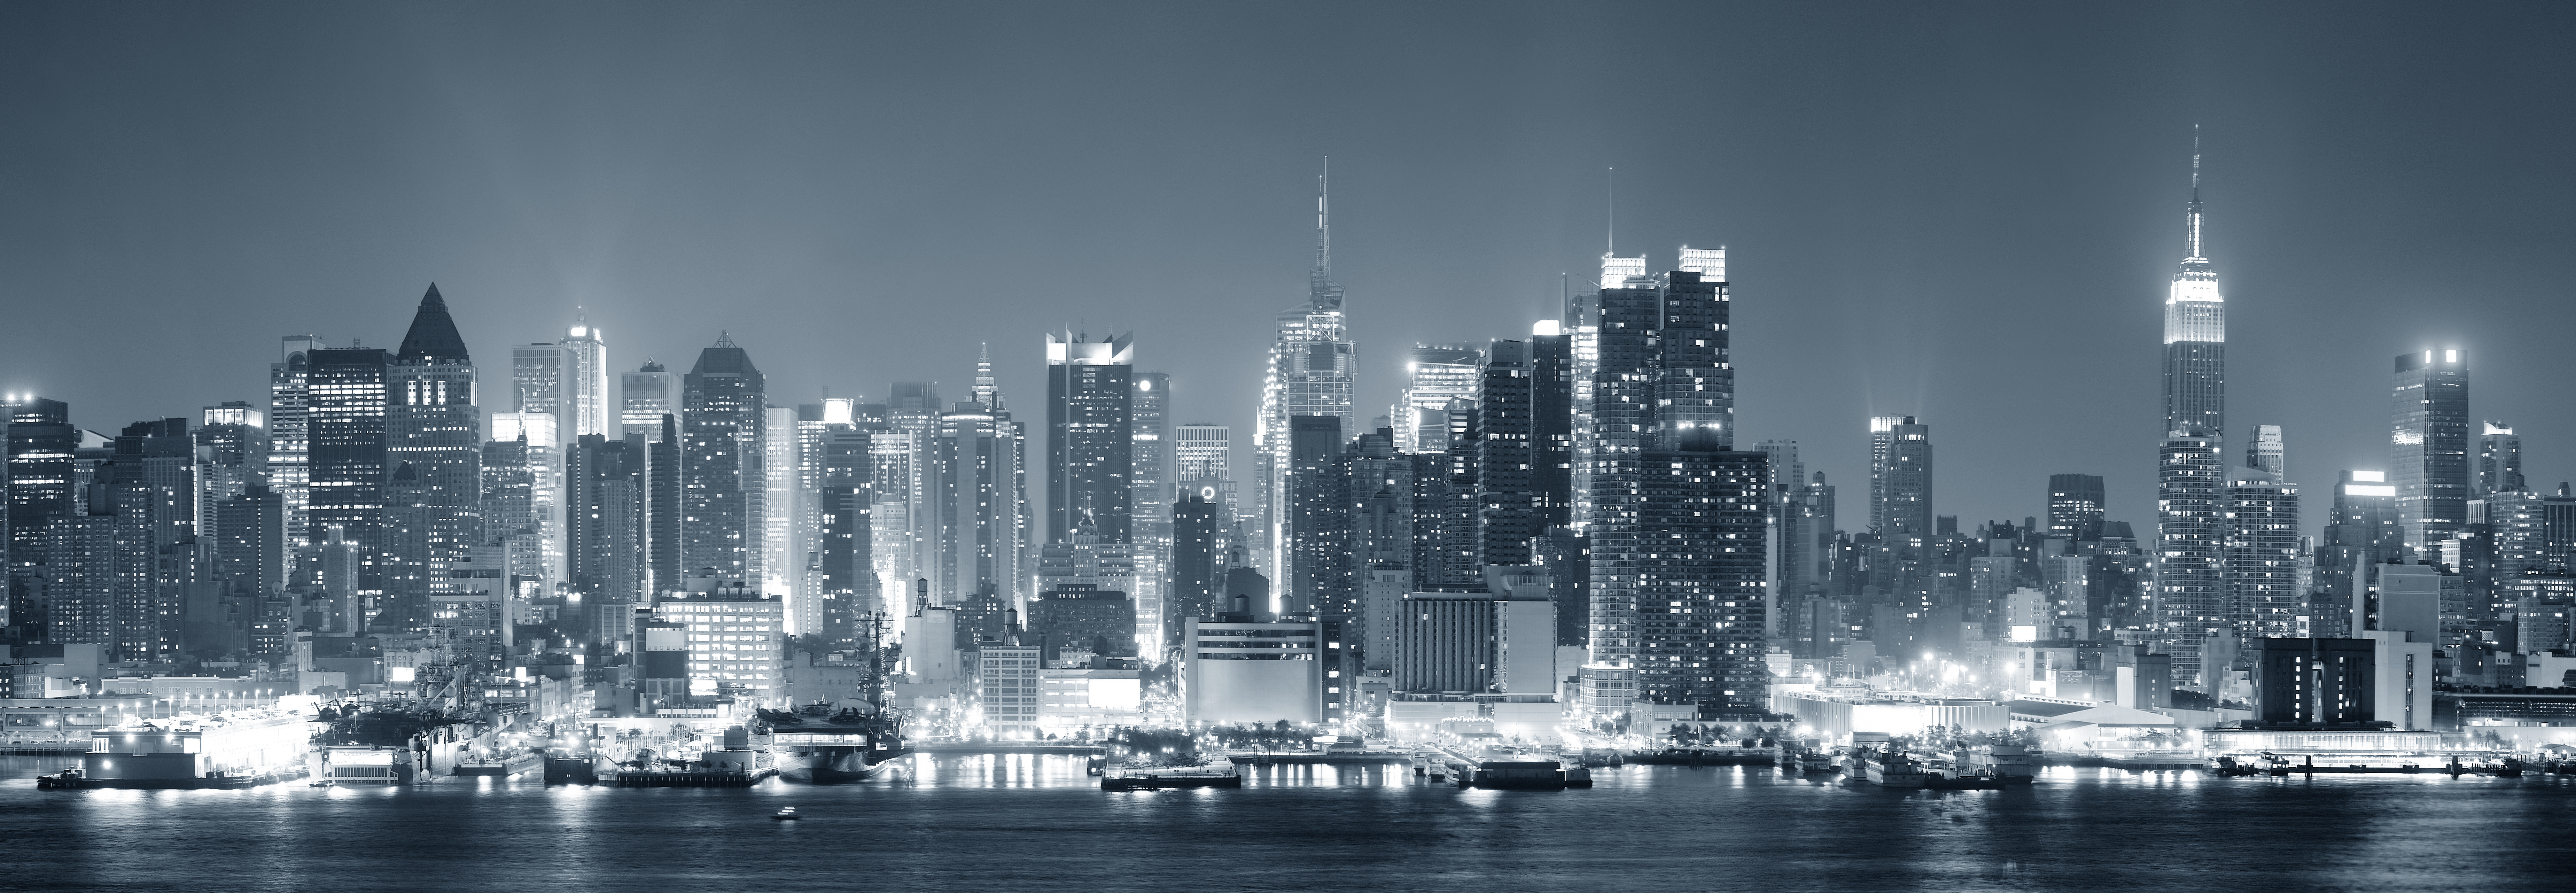 5 New York HD Wallpapers | Background Images - Wallpaper Abyss